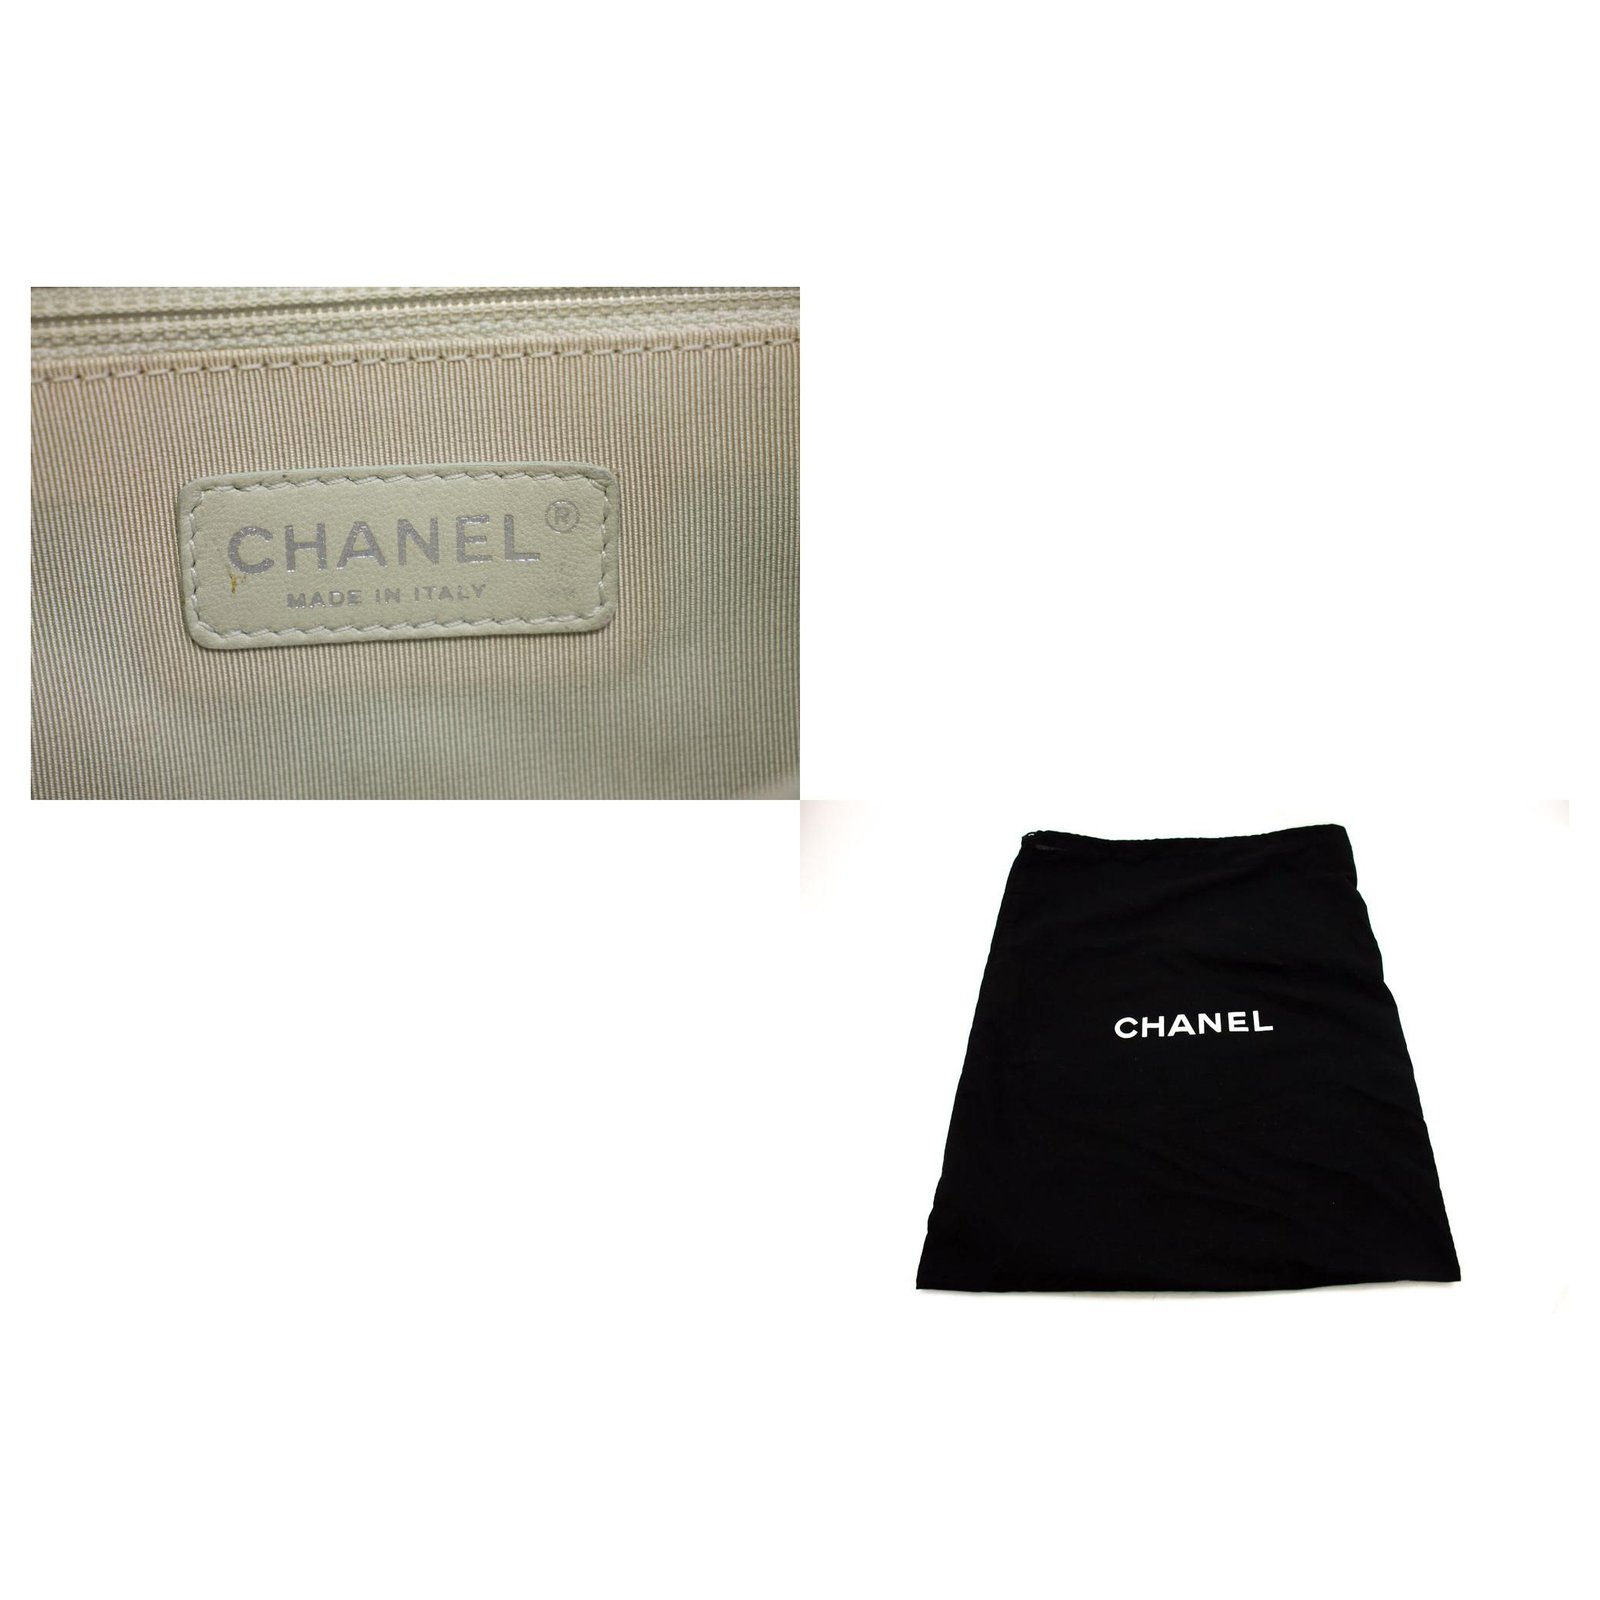 CHANEL Calfskin Quilted Coco Mail Clutch With Chain Black 847857